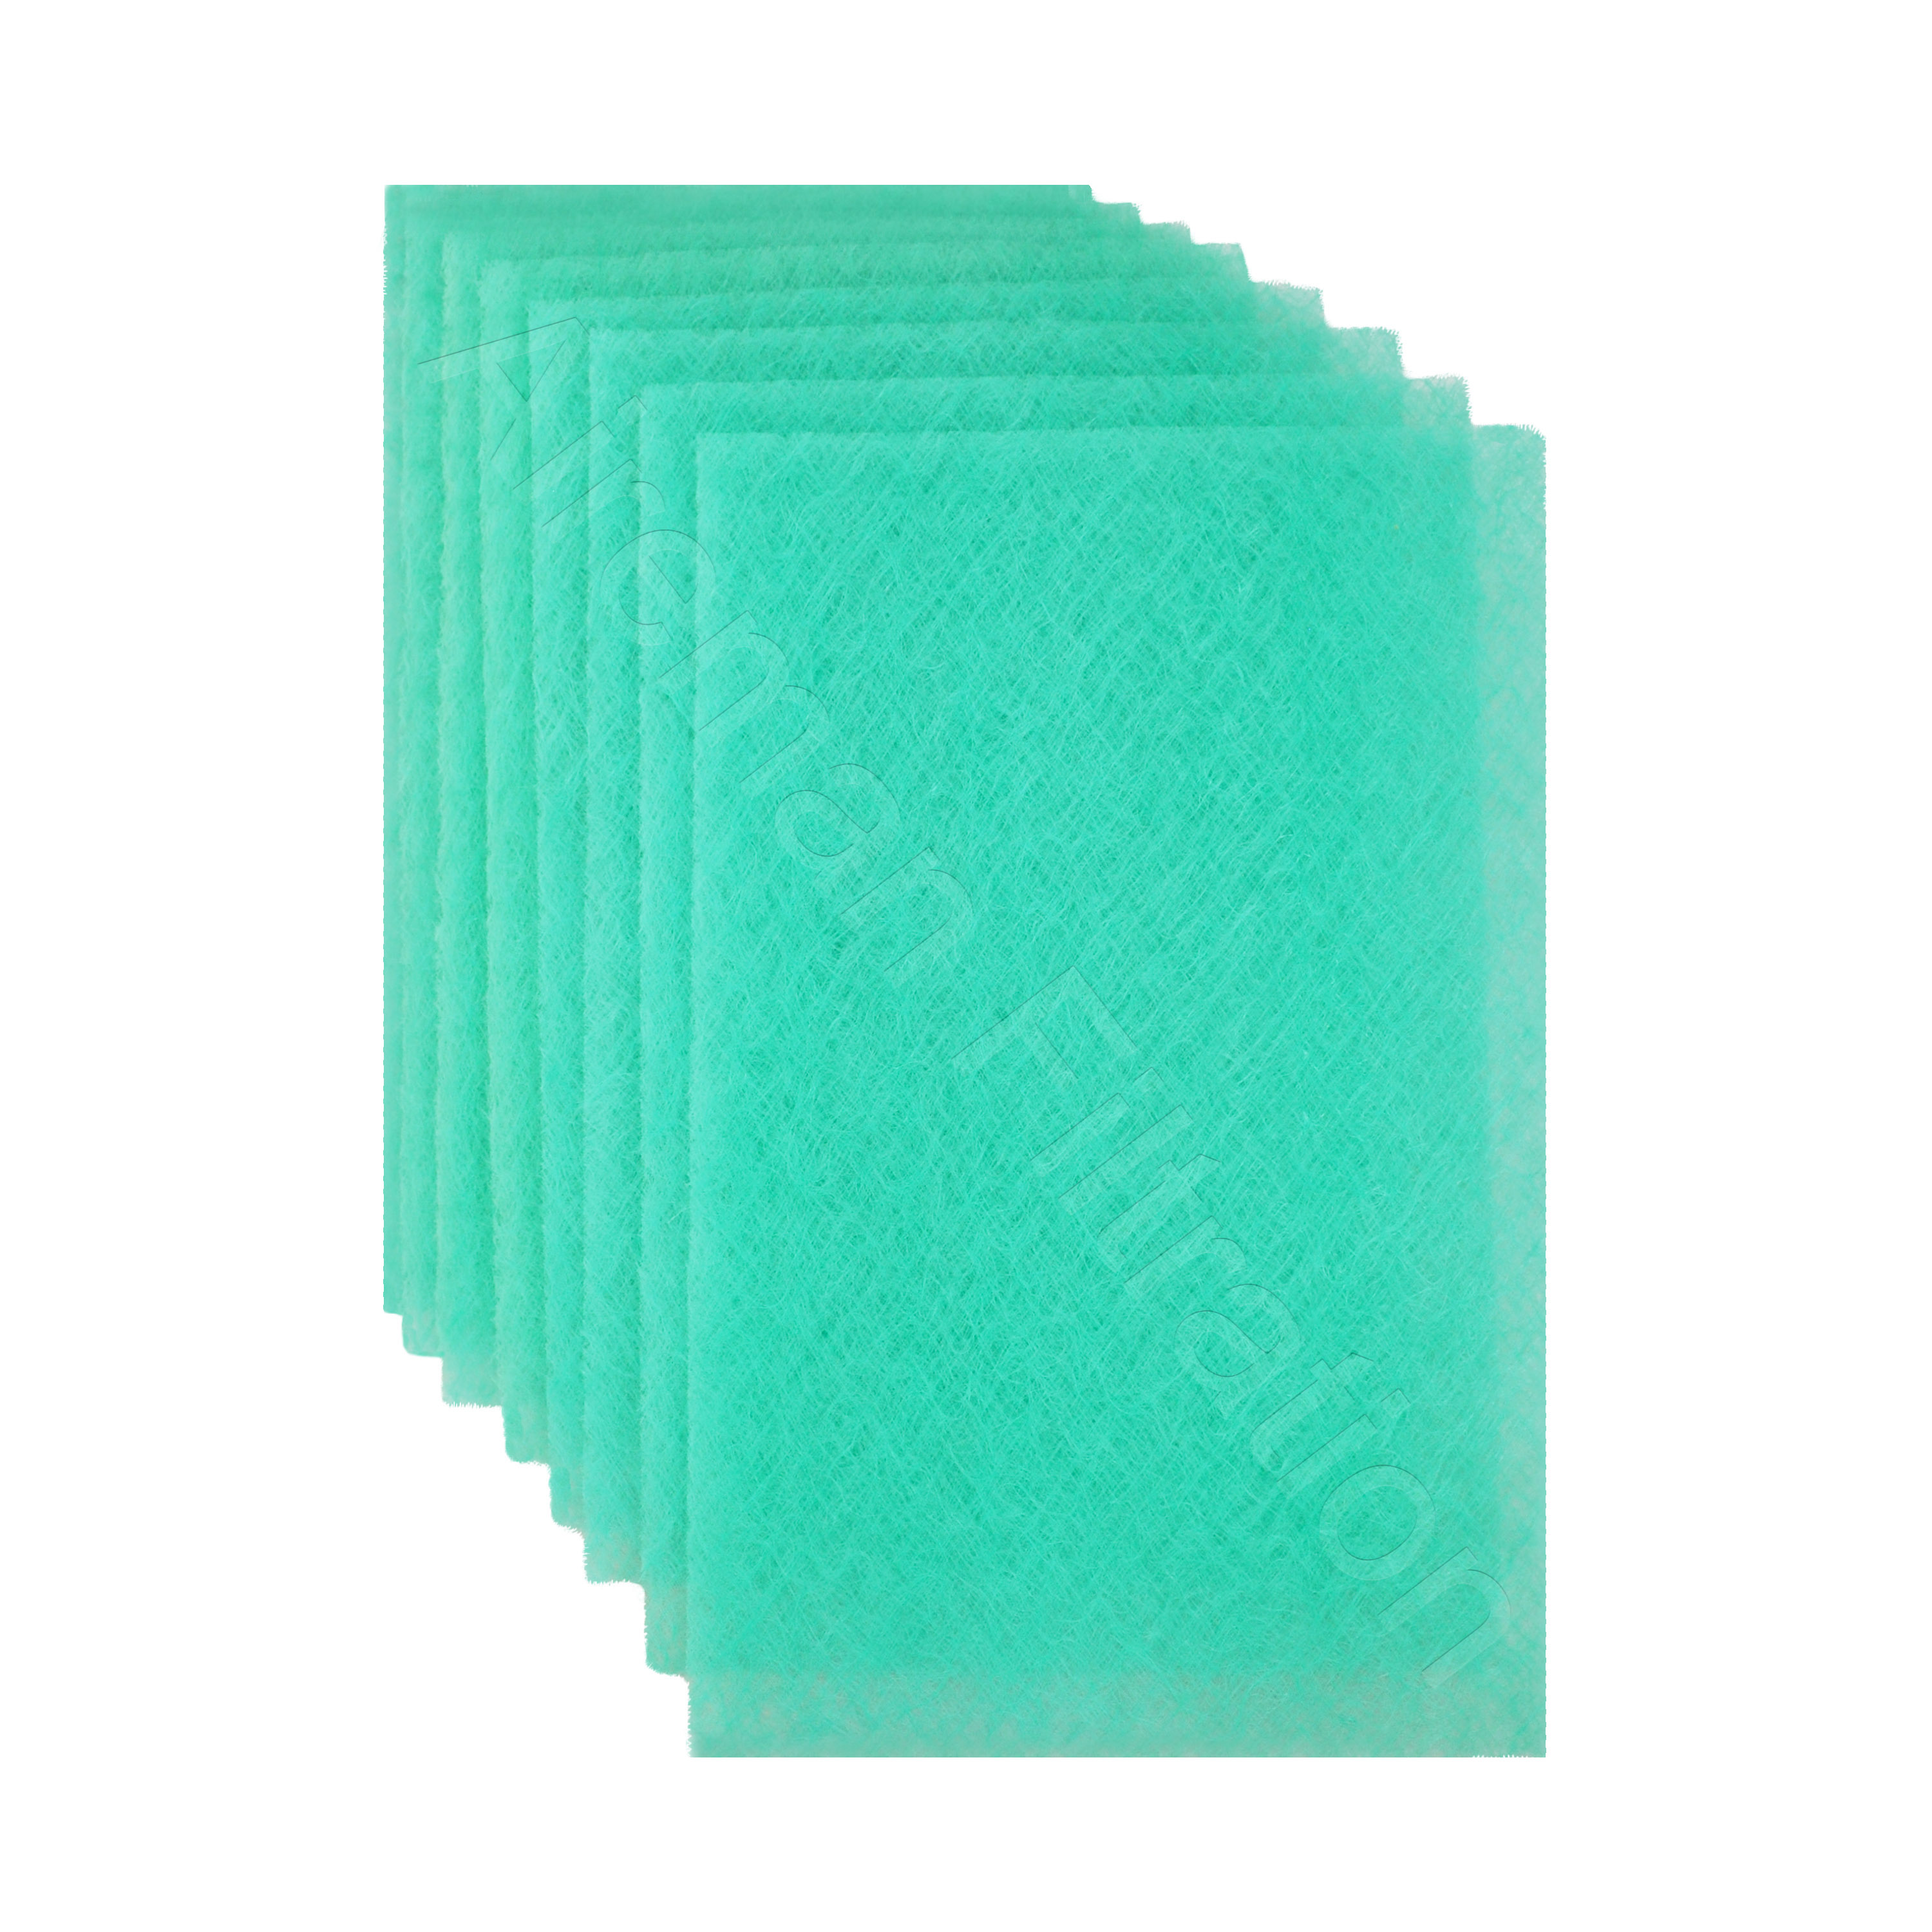 Aireman Filtration Wingman1 - 20x20x1 Electronic AC Furnace Air Filter Replacement Pads Year Supply - 4 Changes